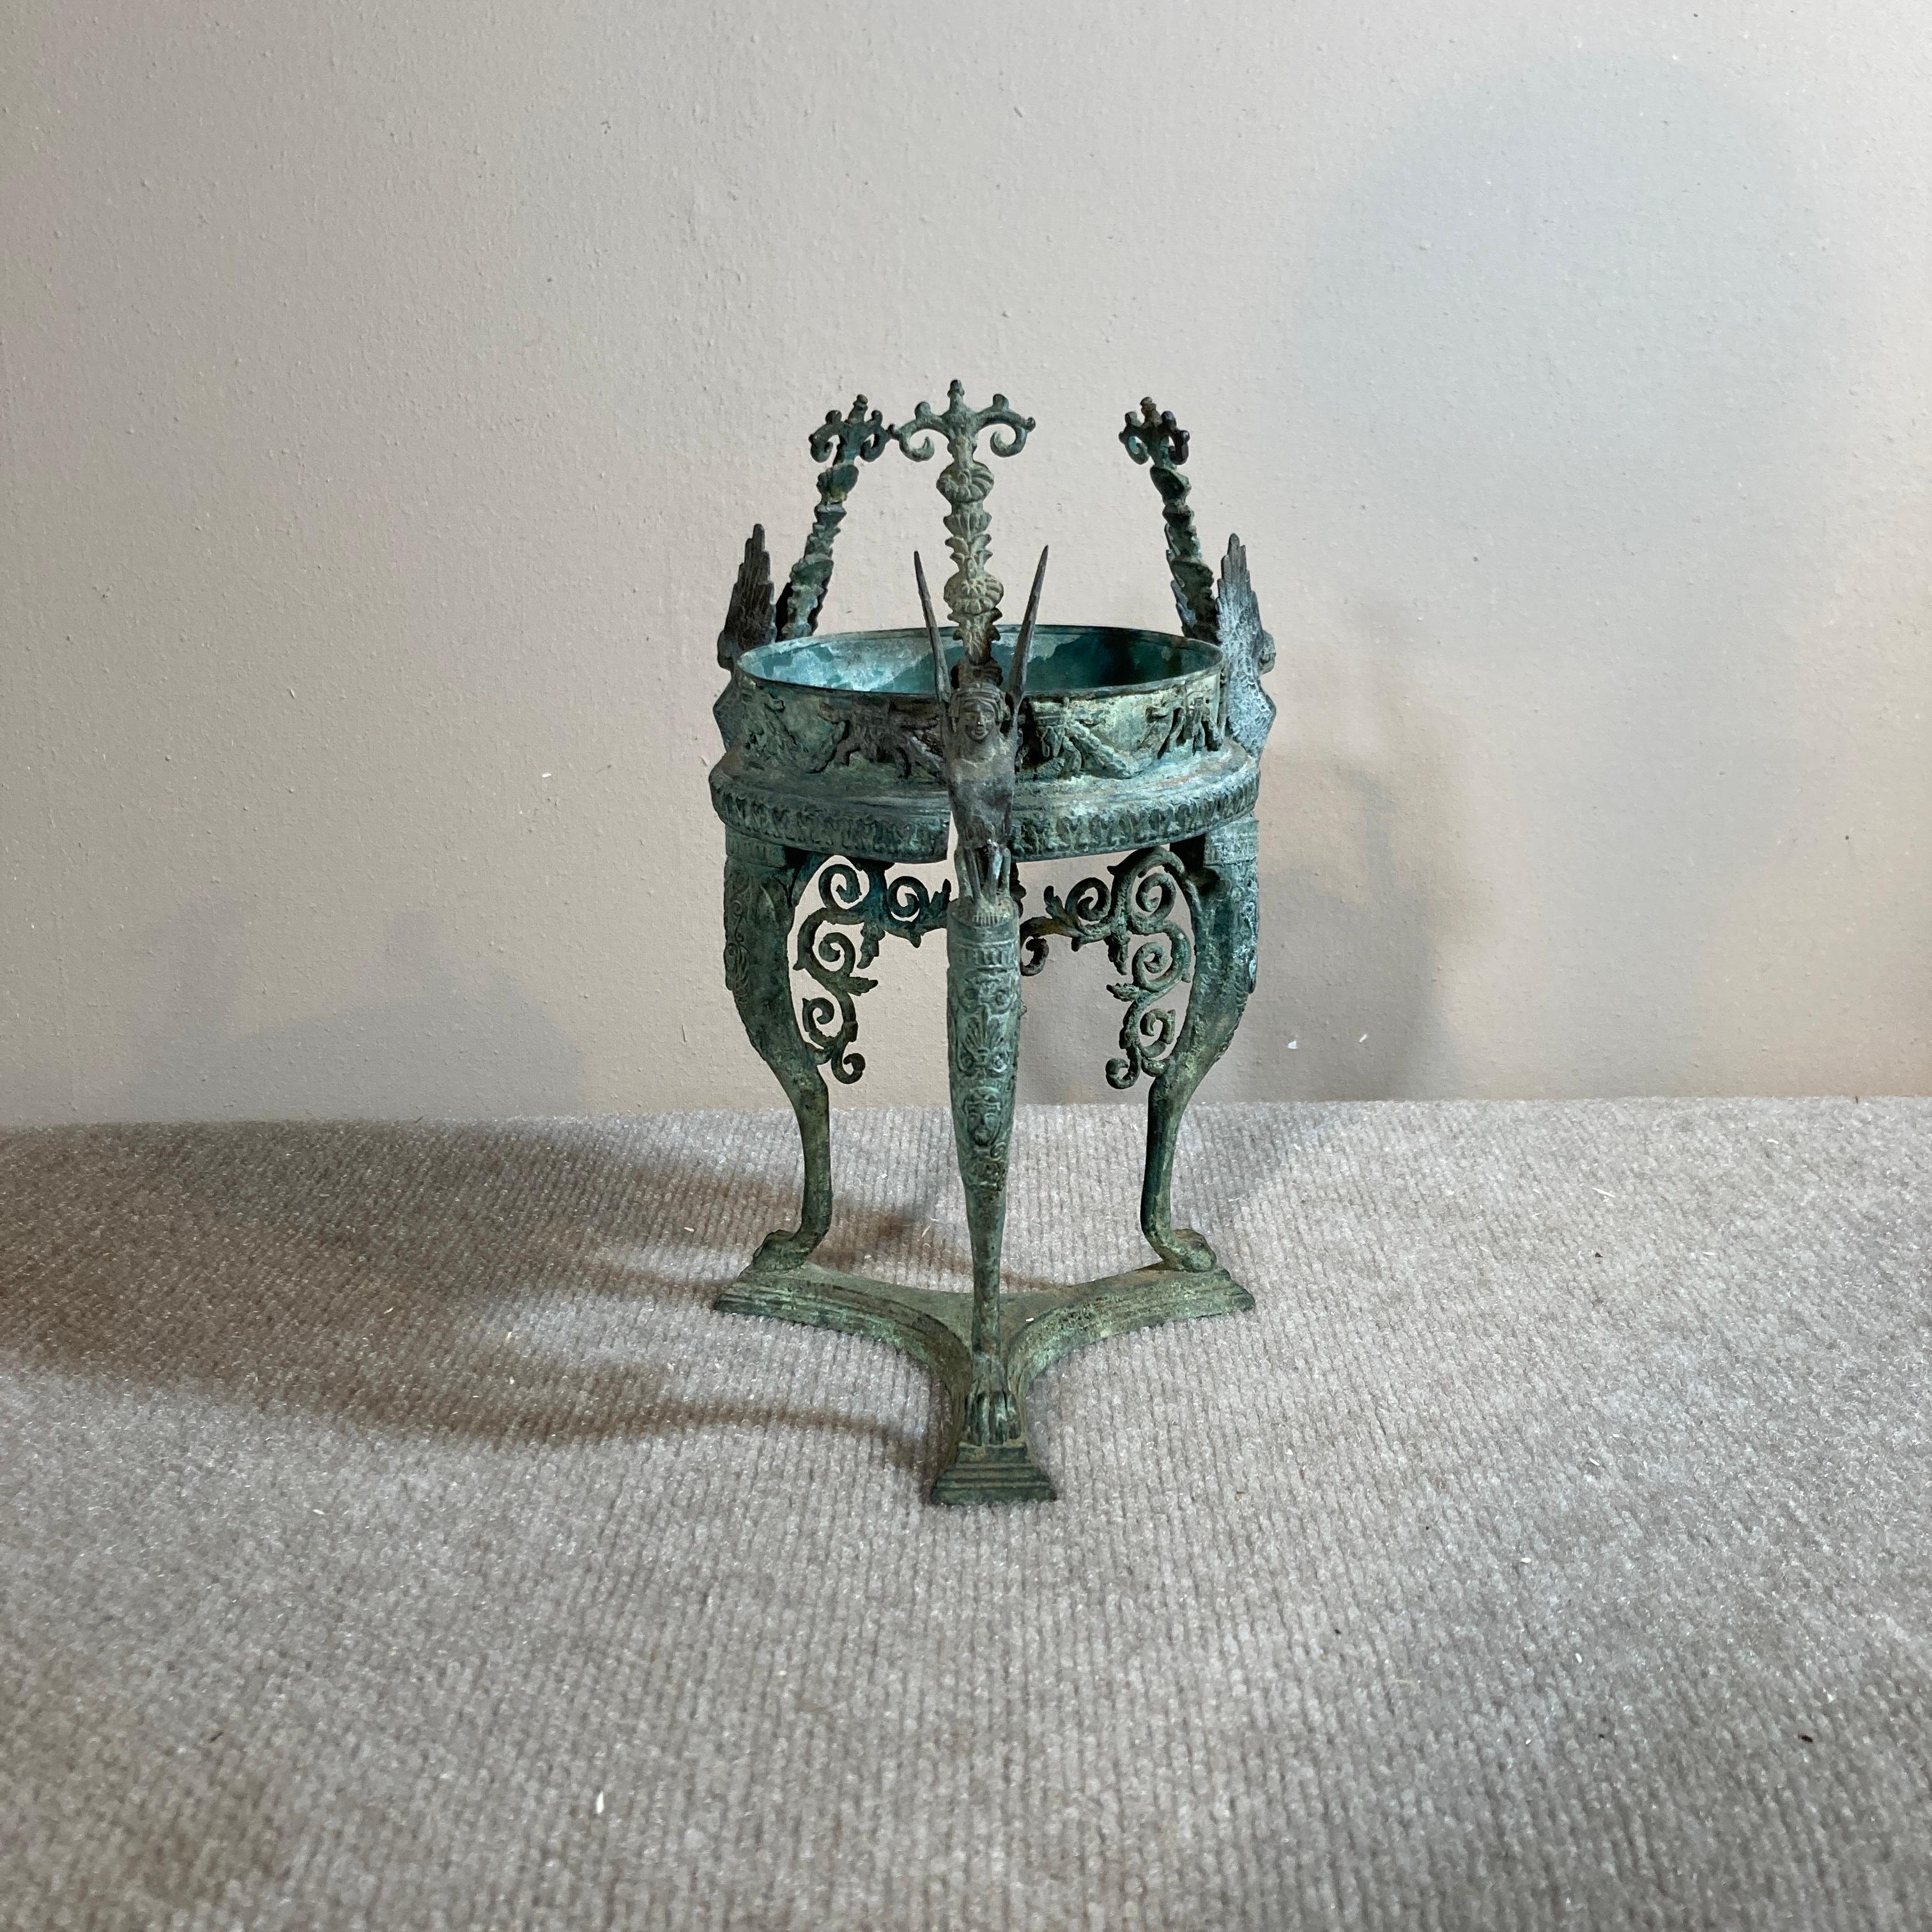 A small grand tour bronze plant holder form around 1900, in the form of an ancient Roman gueridon, in the best verdigris surface. The cast detail, including swags and jabots, caryatids, masks and anthemia, is iconic for the era, and it is of very